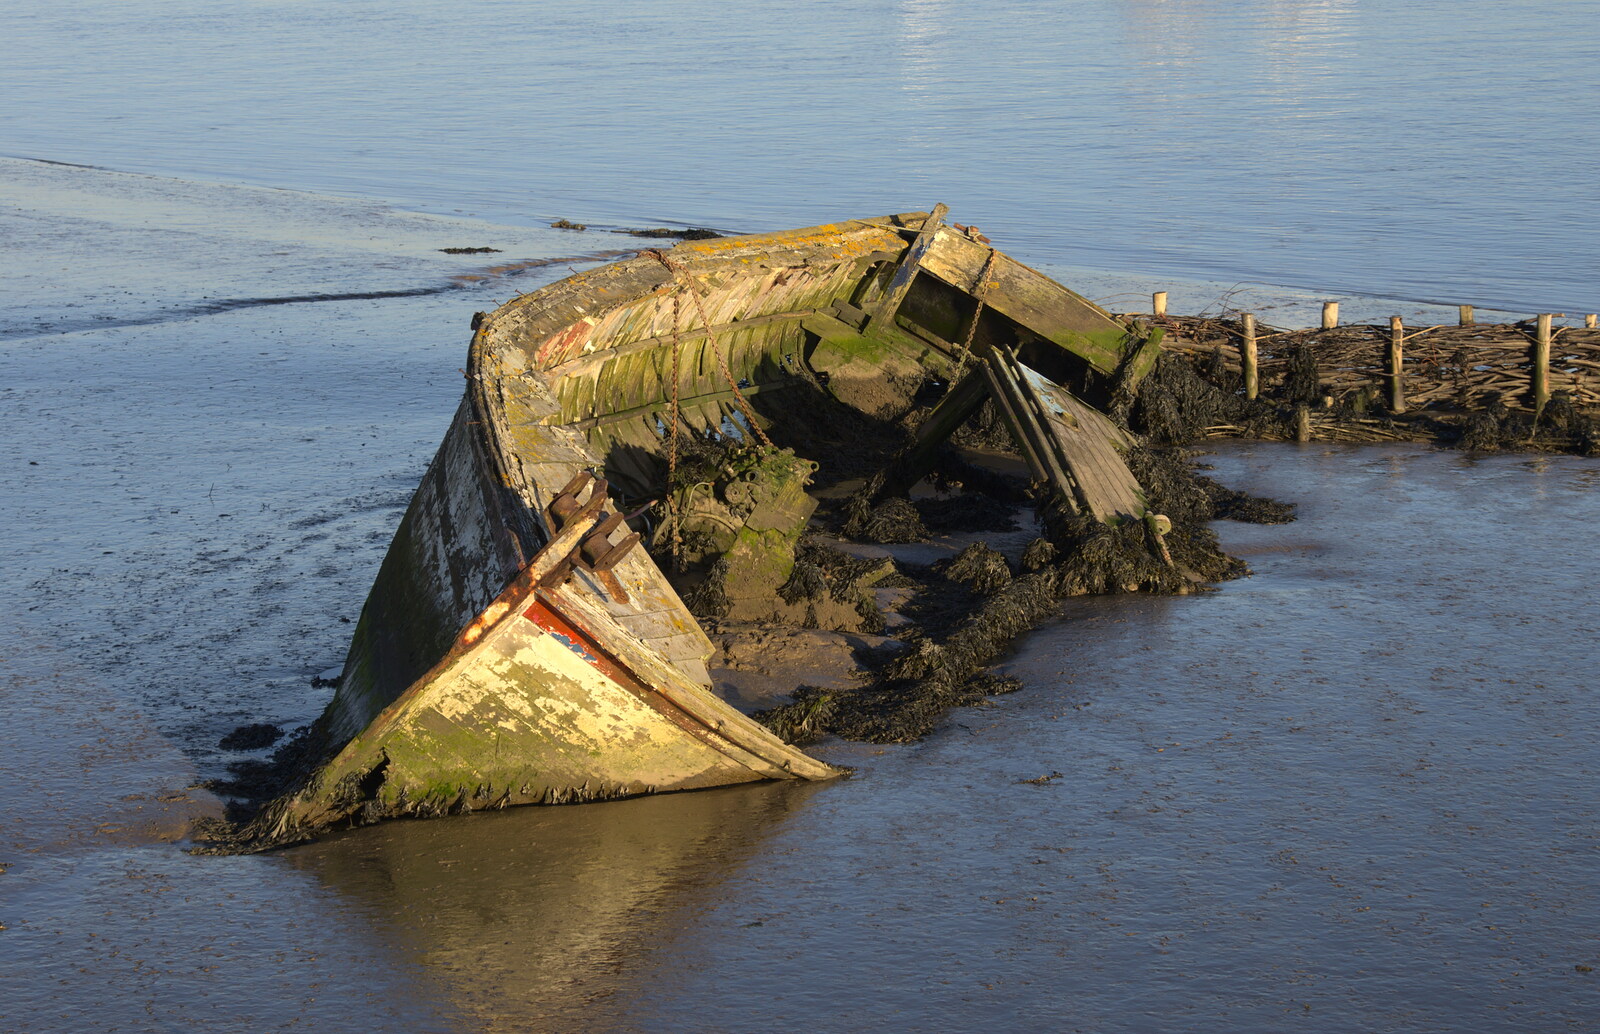 The skeleton of an old boat from An Orford Day Out, Orford, Suffolk - 17th February 2018